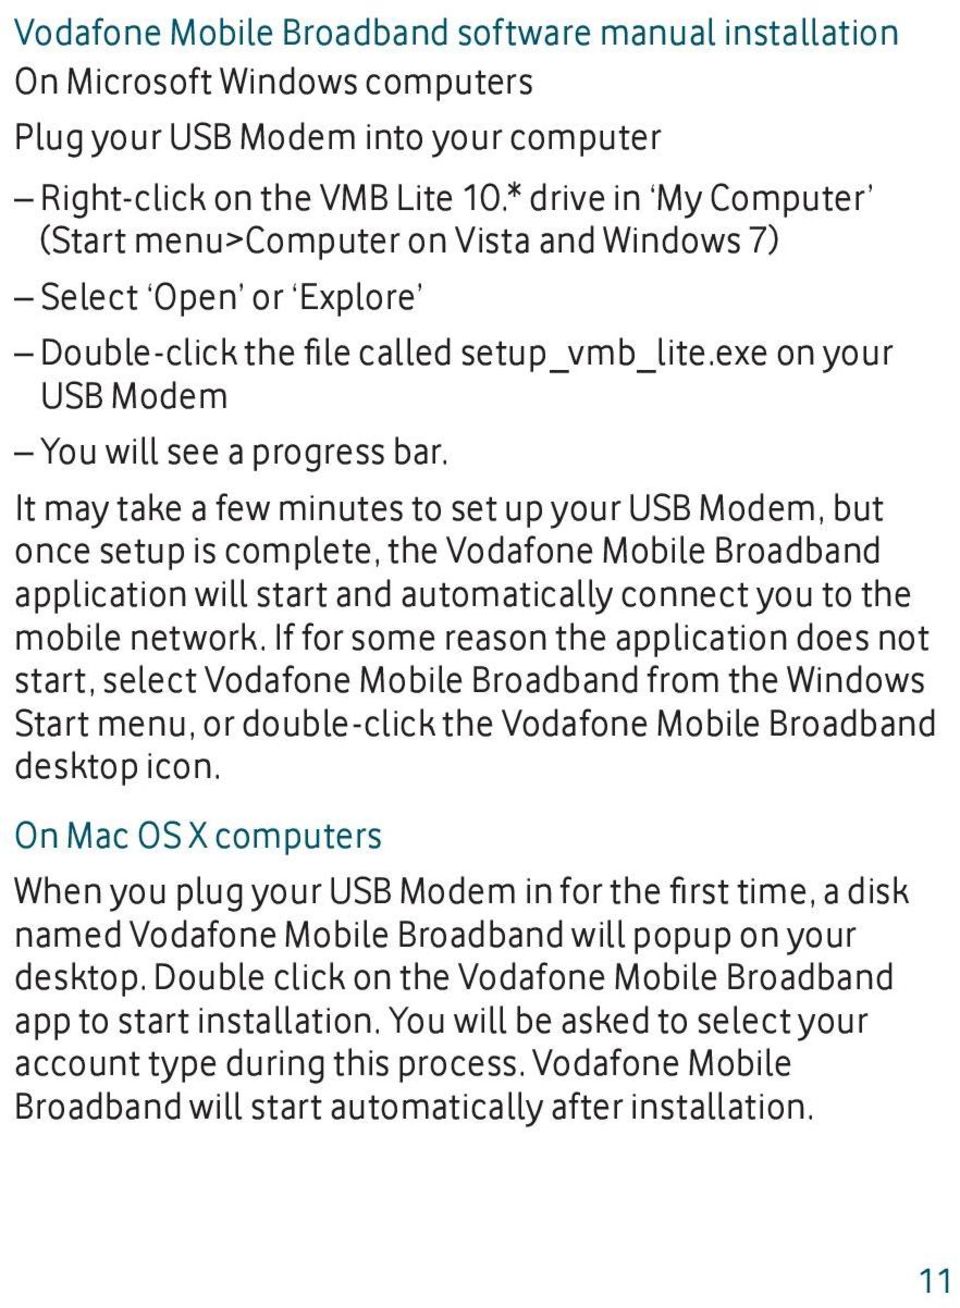 It may take a few minutes to set up your USB Modem, but once setup is complete, the Vodafone Mobile Broadband application will start and automatically connect you to the mobile network.